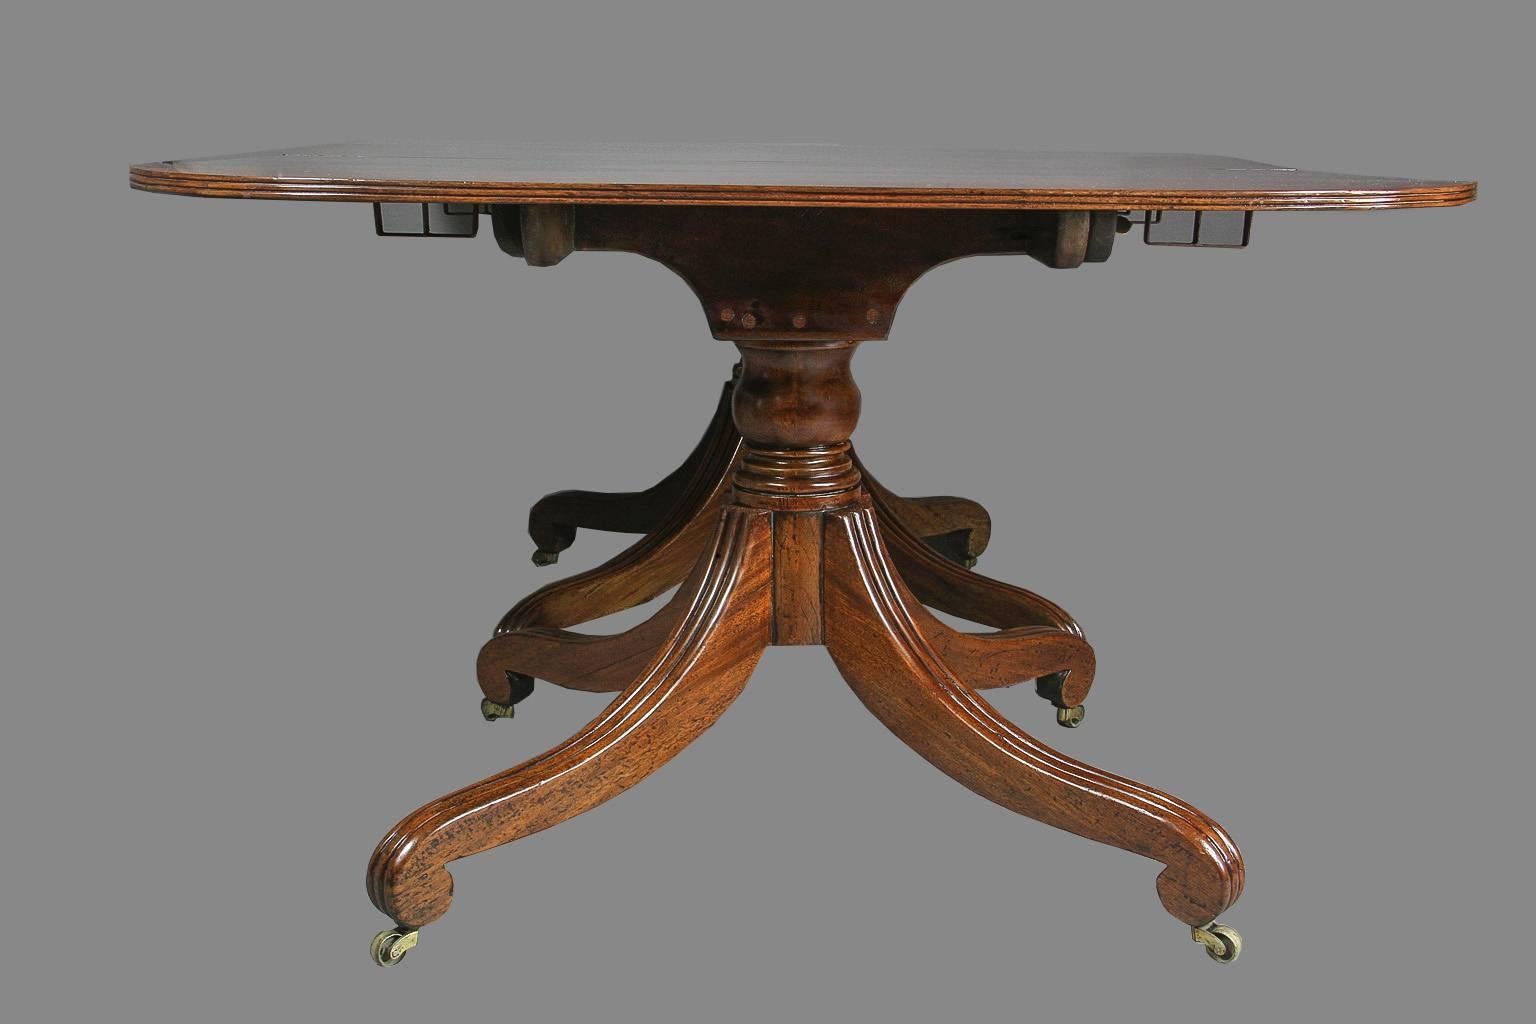 Beautiful figured three-section top with two additional original leaves supported on three urn form pillars each joined by four reeded saber legs with scroll feet and casters. Table has clips and wood runners.